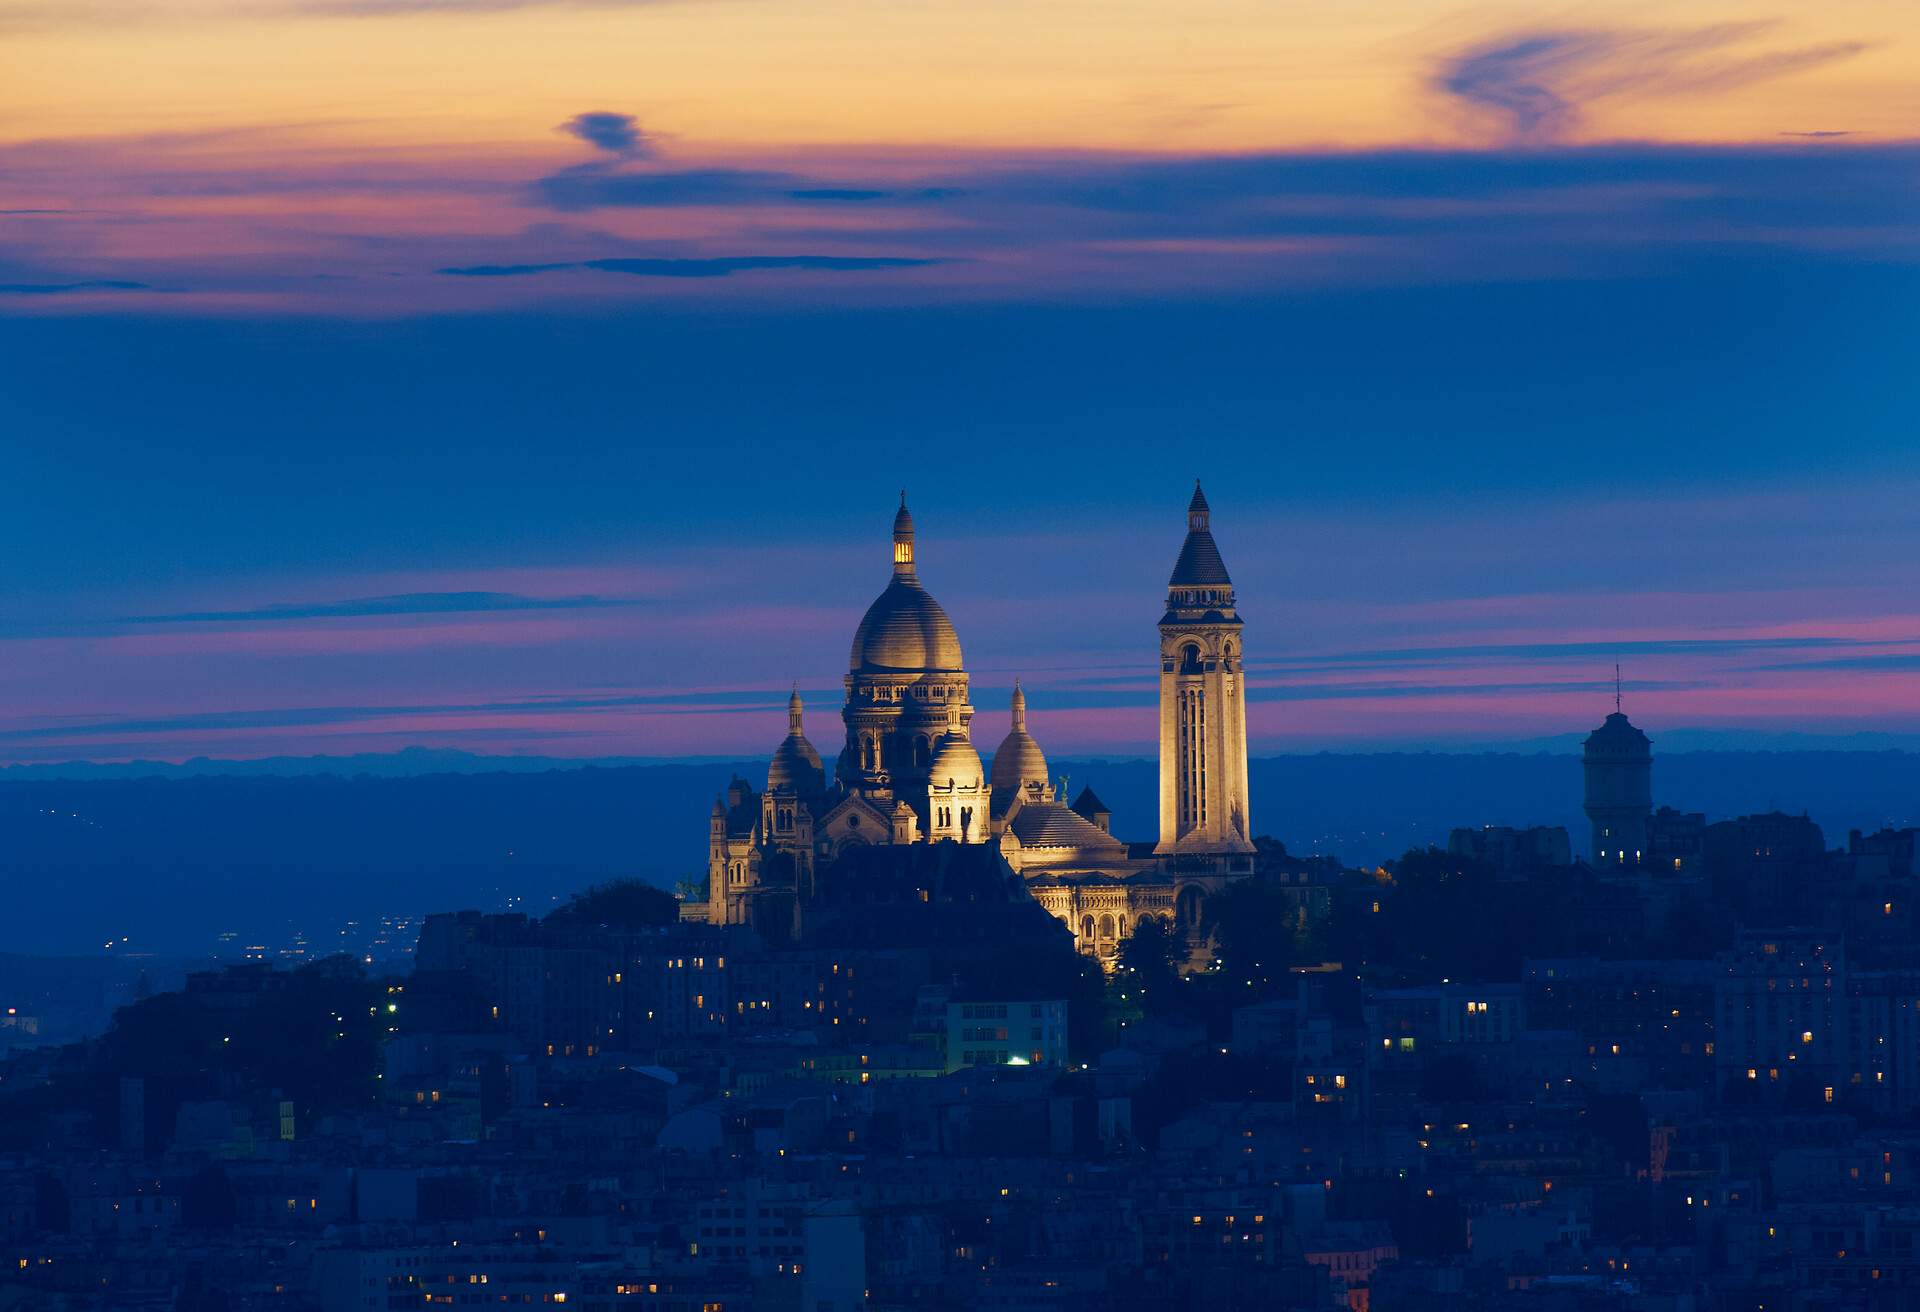 Illuminated church of Sacre Coeur in Paris at dusk surrounded by buildings